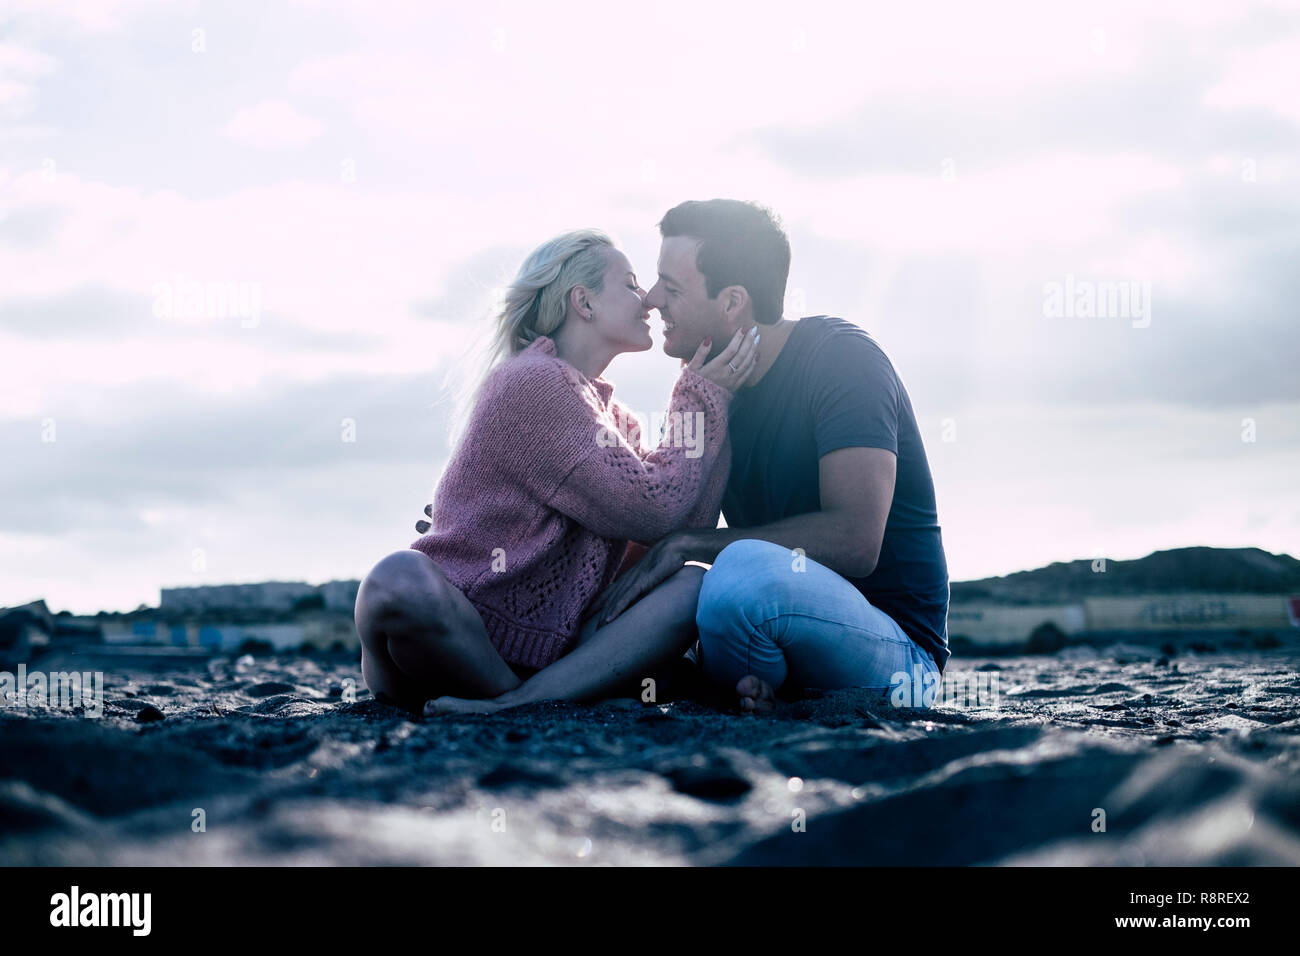 Romantic kiss and love with couple in winter enjoying sit down at the beach in nature outdoor scenic place - millennial people lifestyle concept - def Stock Photo